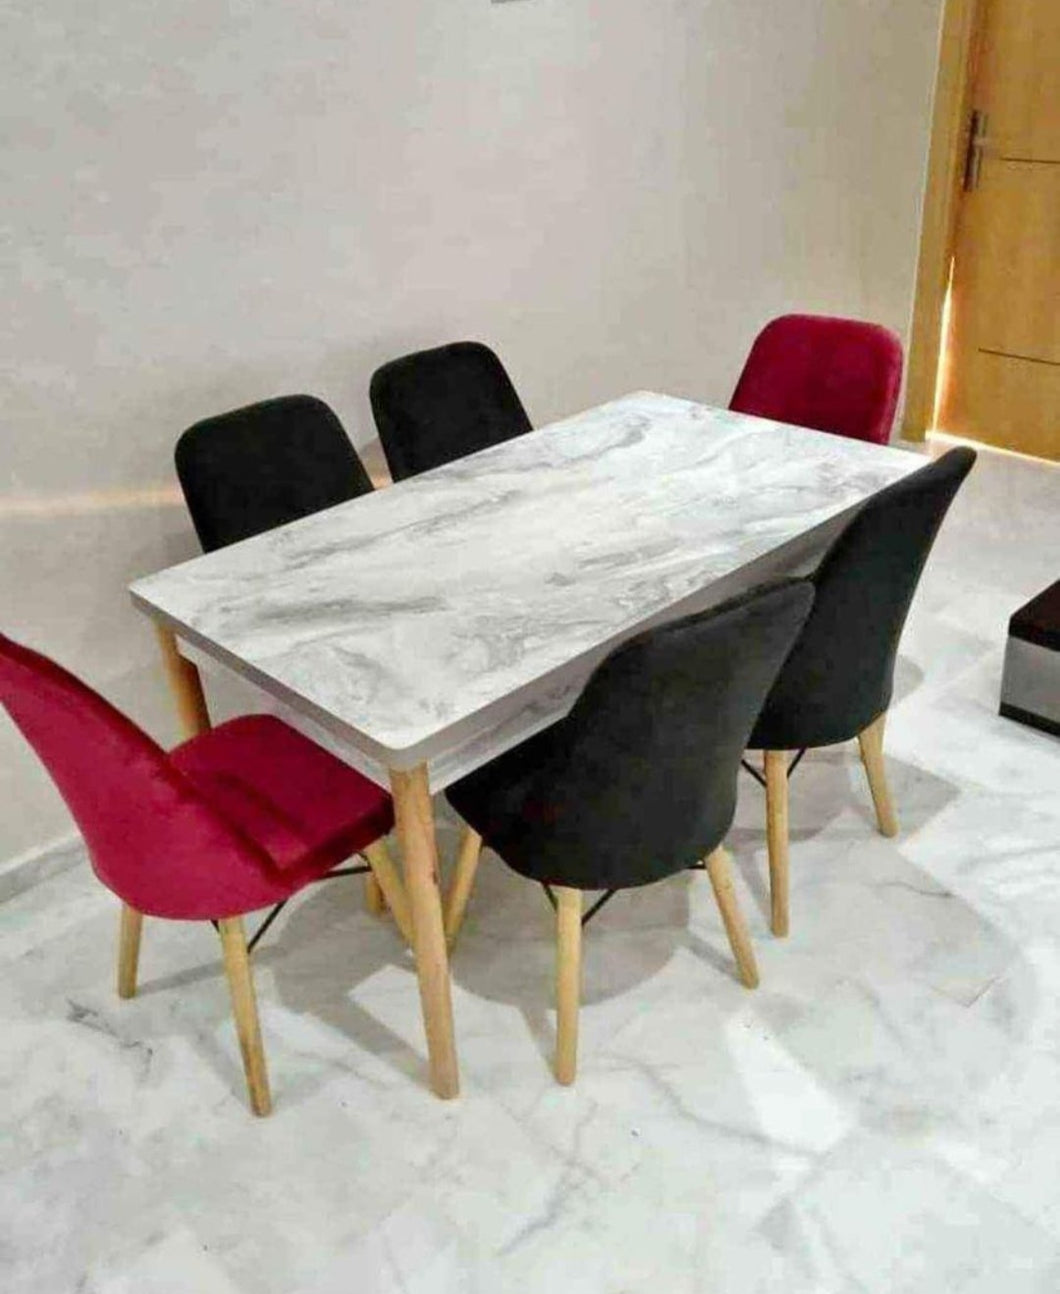 Table + chaises